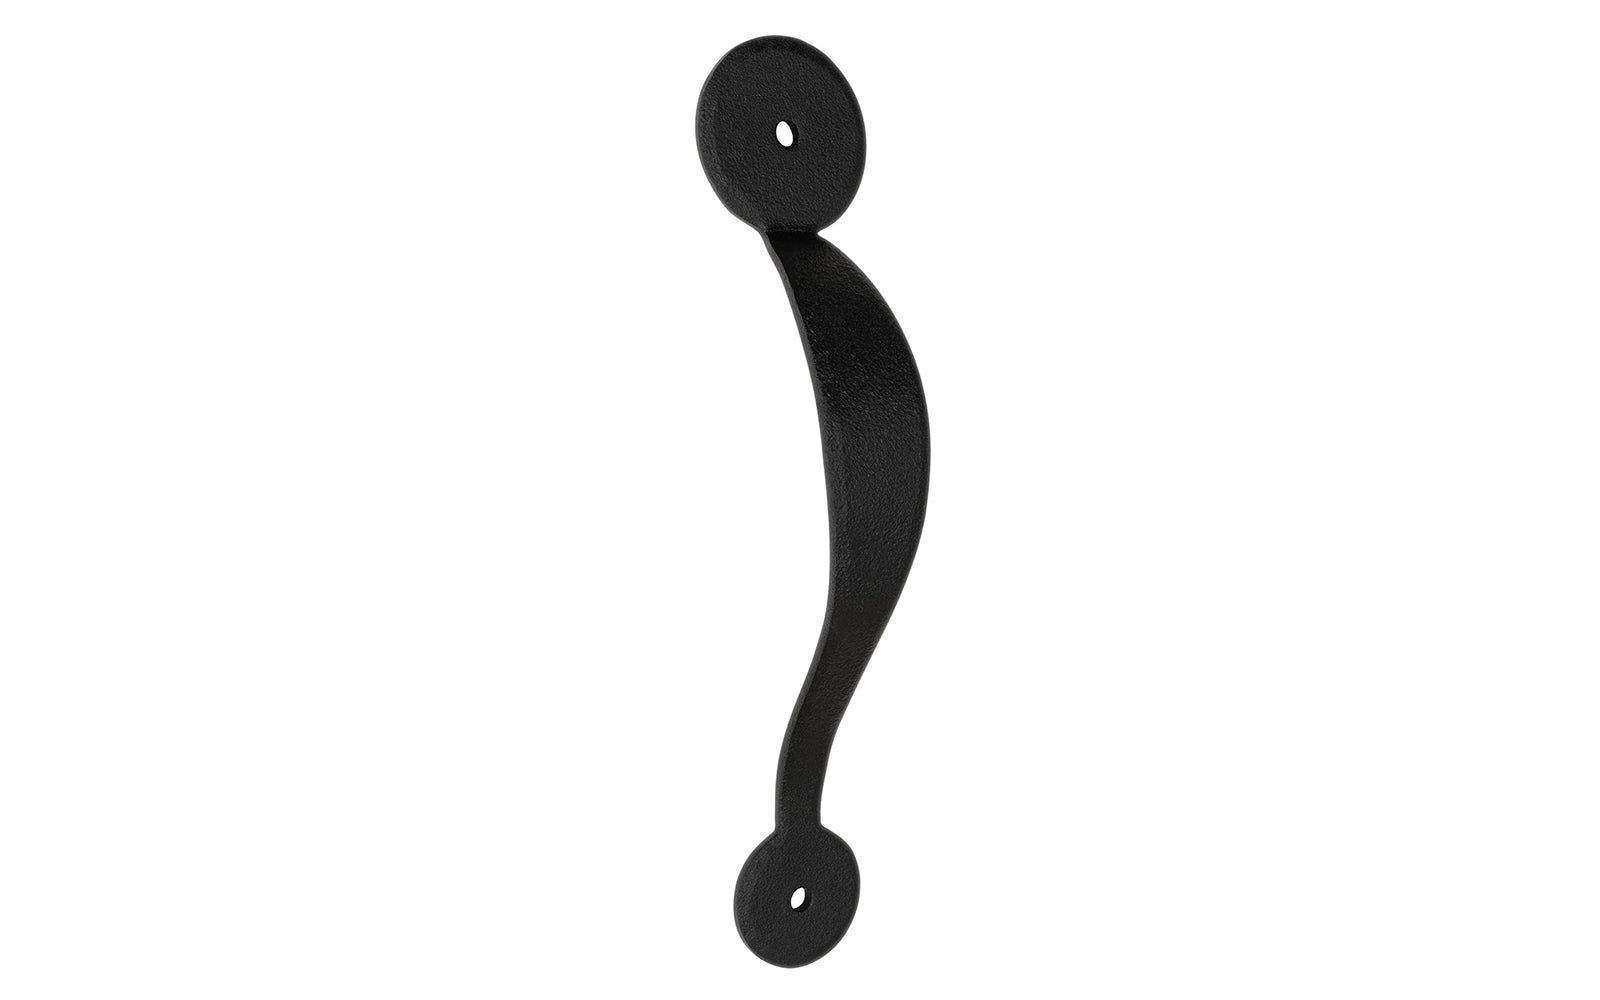 A hand-forged door pull handle with circle end tips. Steel material with a black finish, it has a nice durable feel. This traditional-looking piece of hardware is great for doors, gates, & large cabinets. Powder coated to resist rust. Circle tips - Early-American Style - Cast Iron - 7" overall length - Model 88491